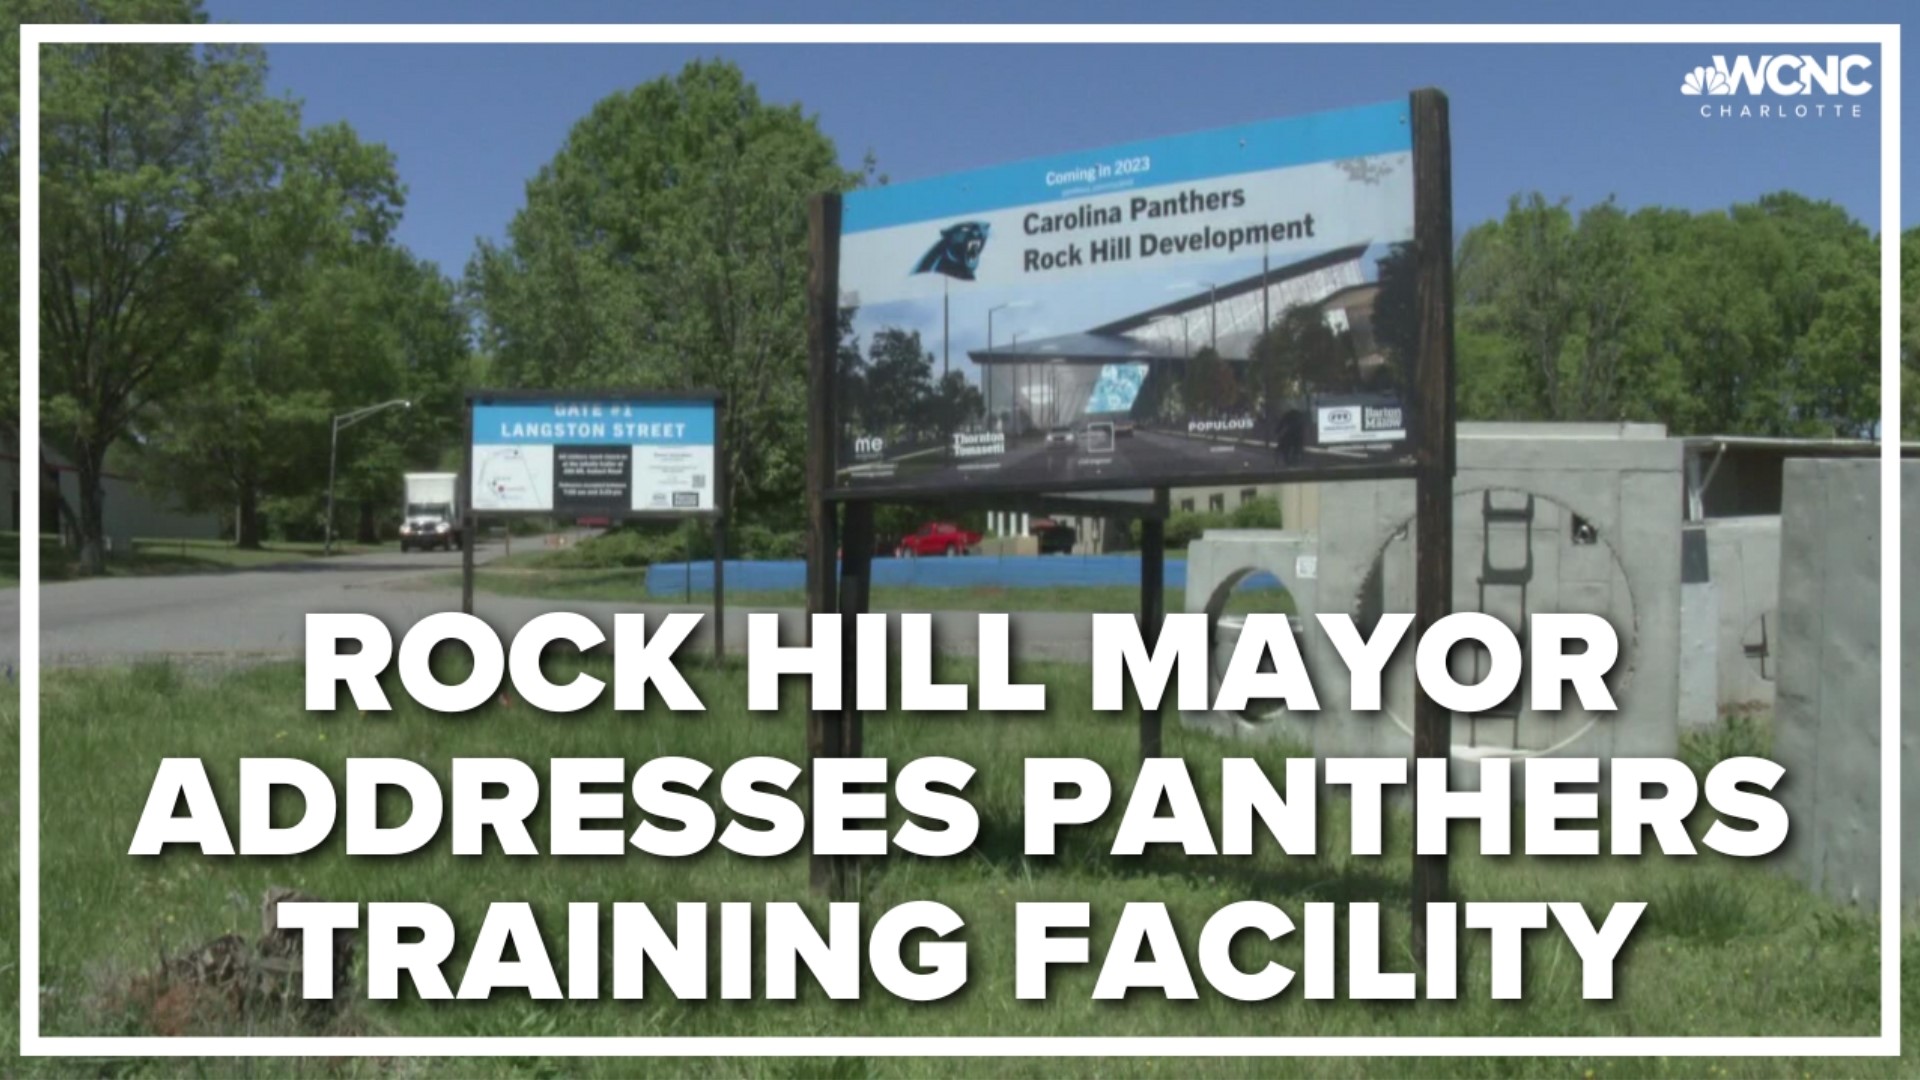 The Mayor of Rock Hill shed some light on what's to come after the Panthers' training facility slated for the city failed.